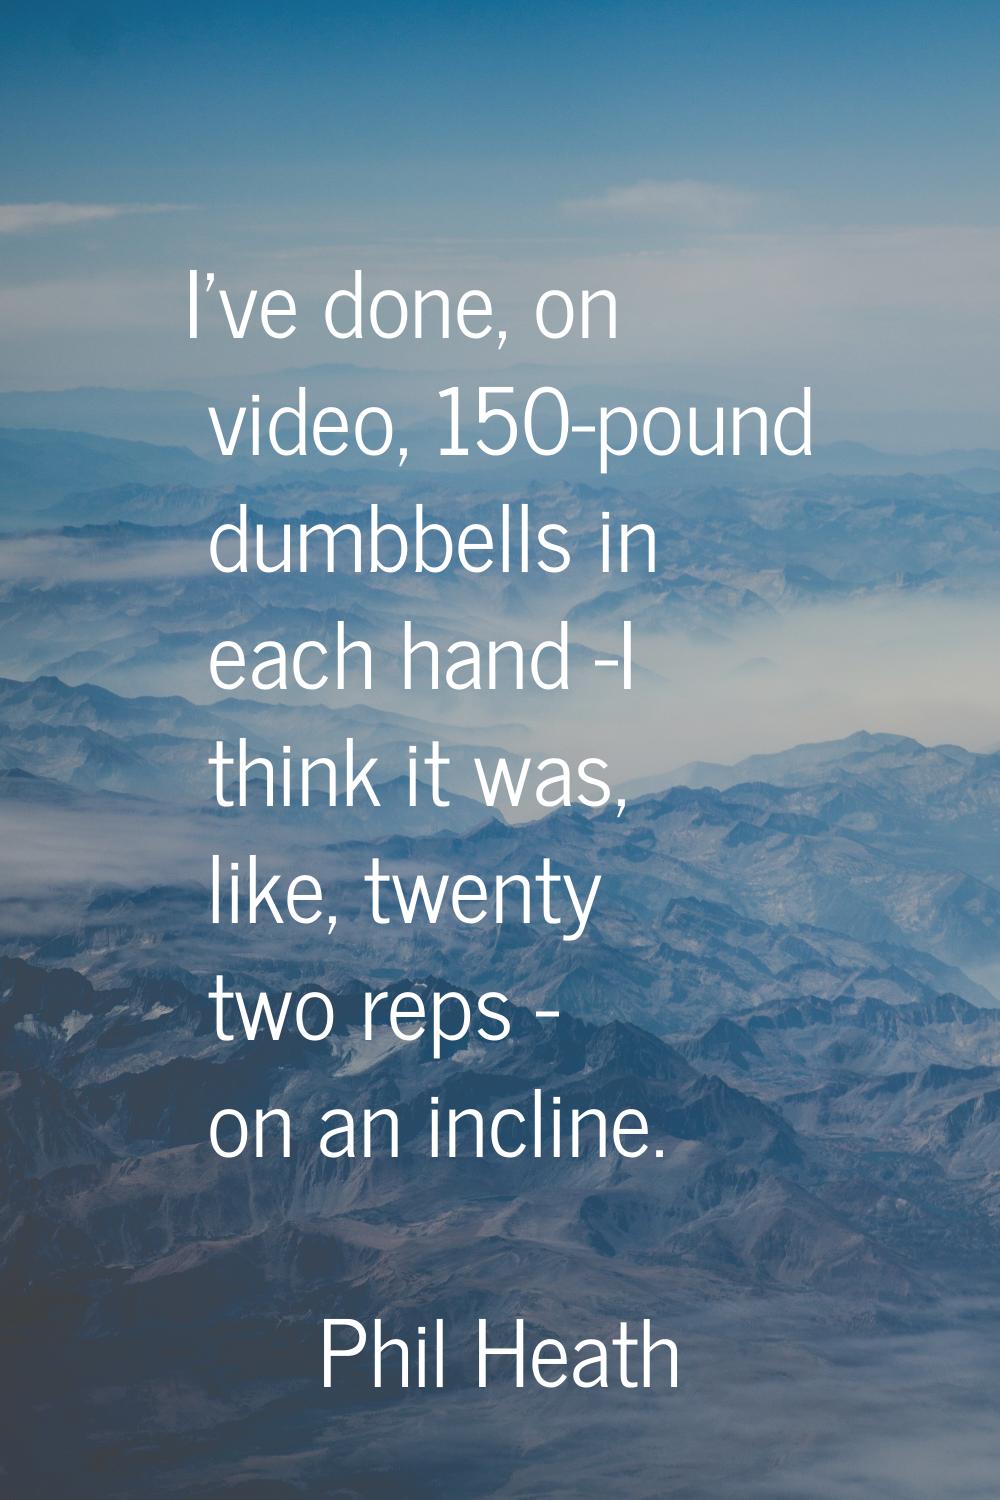 I've done, on video, 150-pound dumbbells in each hand -I think it was, like, twenty two reps - on a